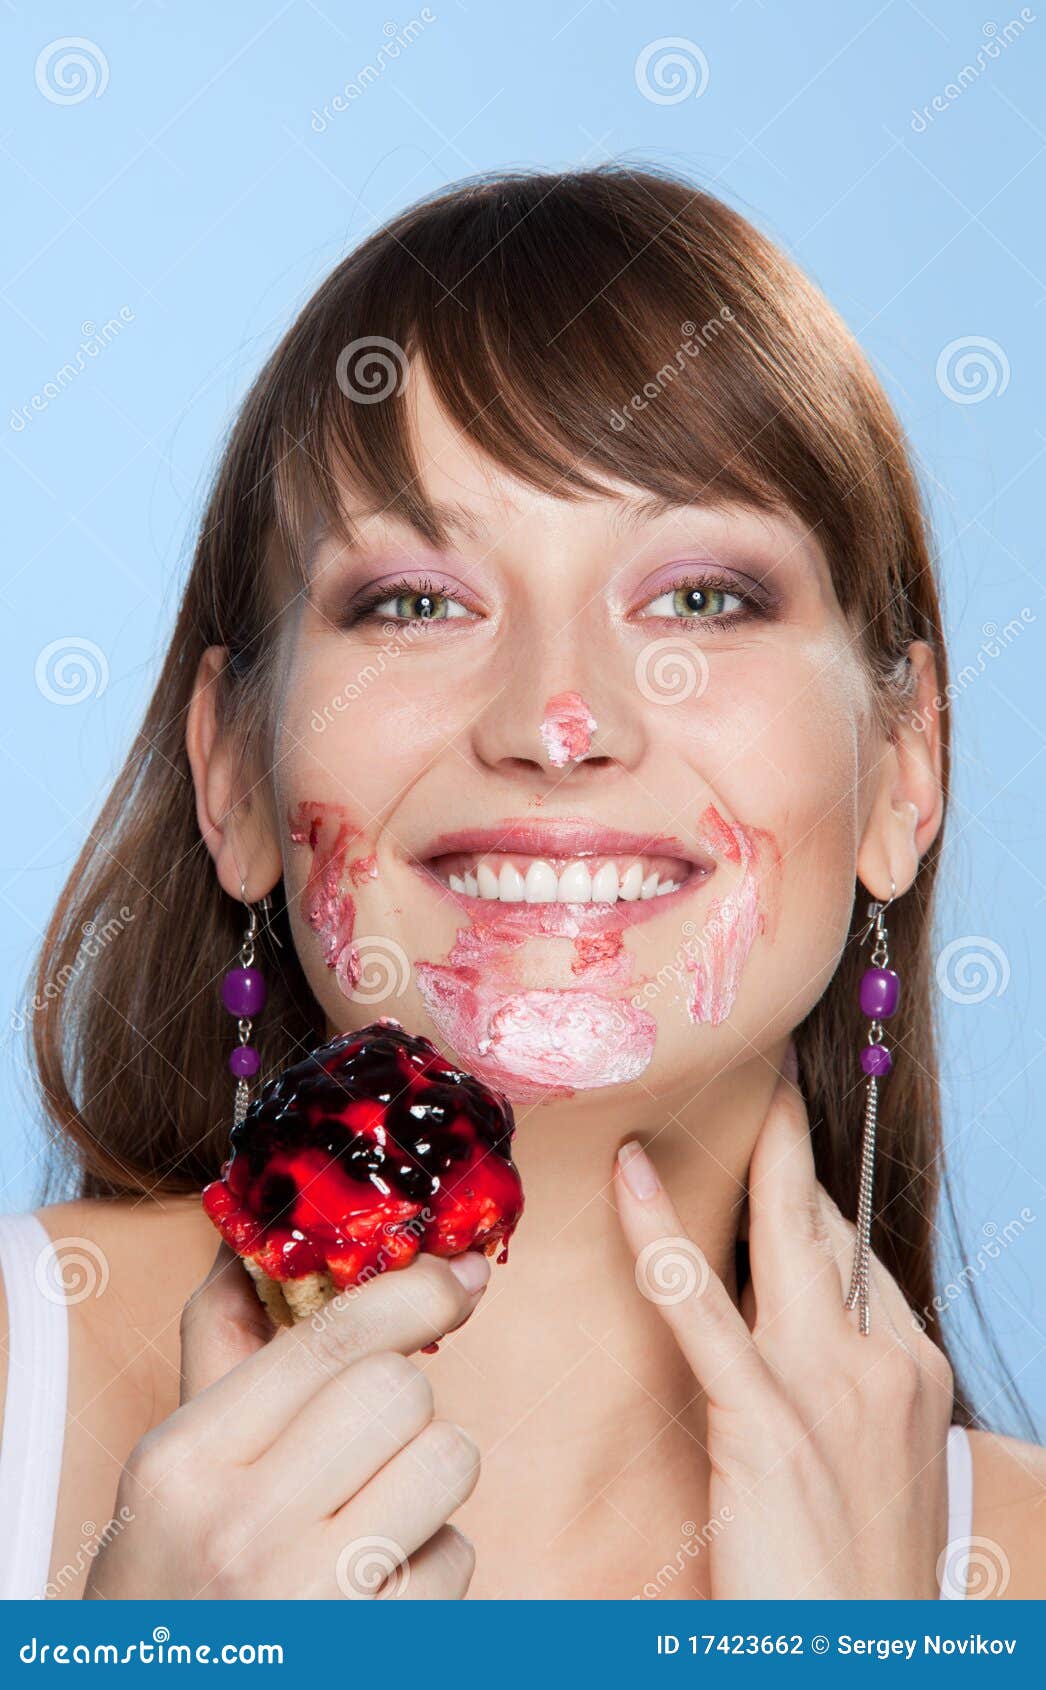 Face in birthday cake GIF download free